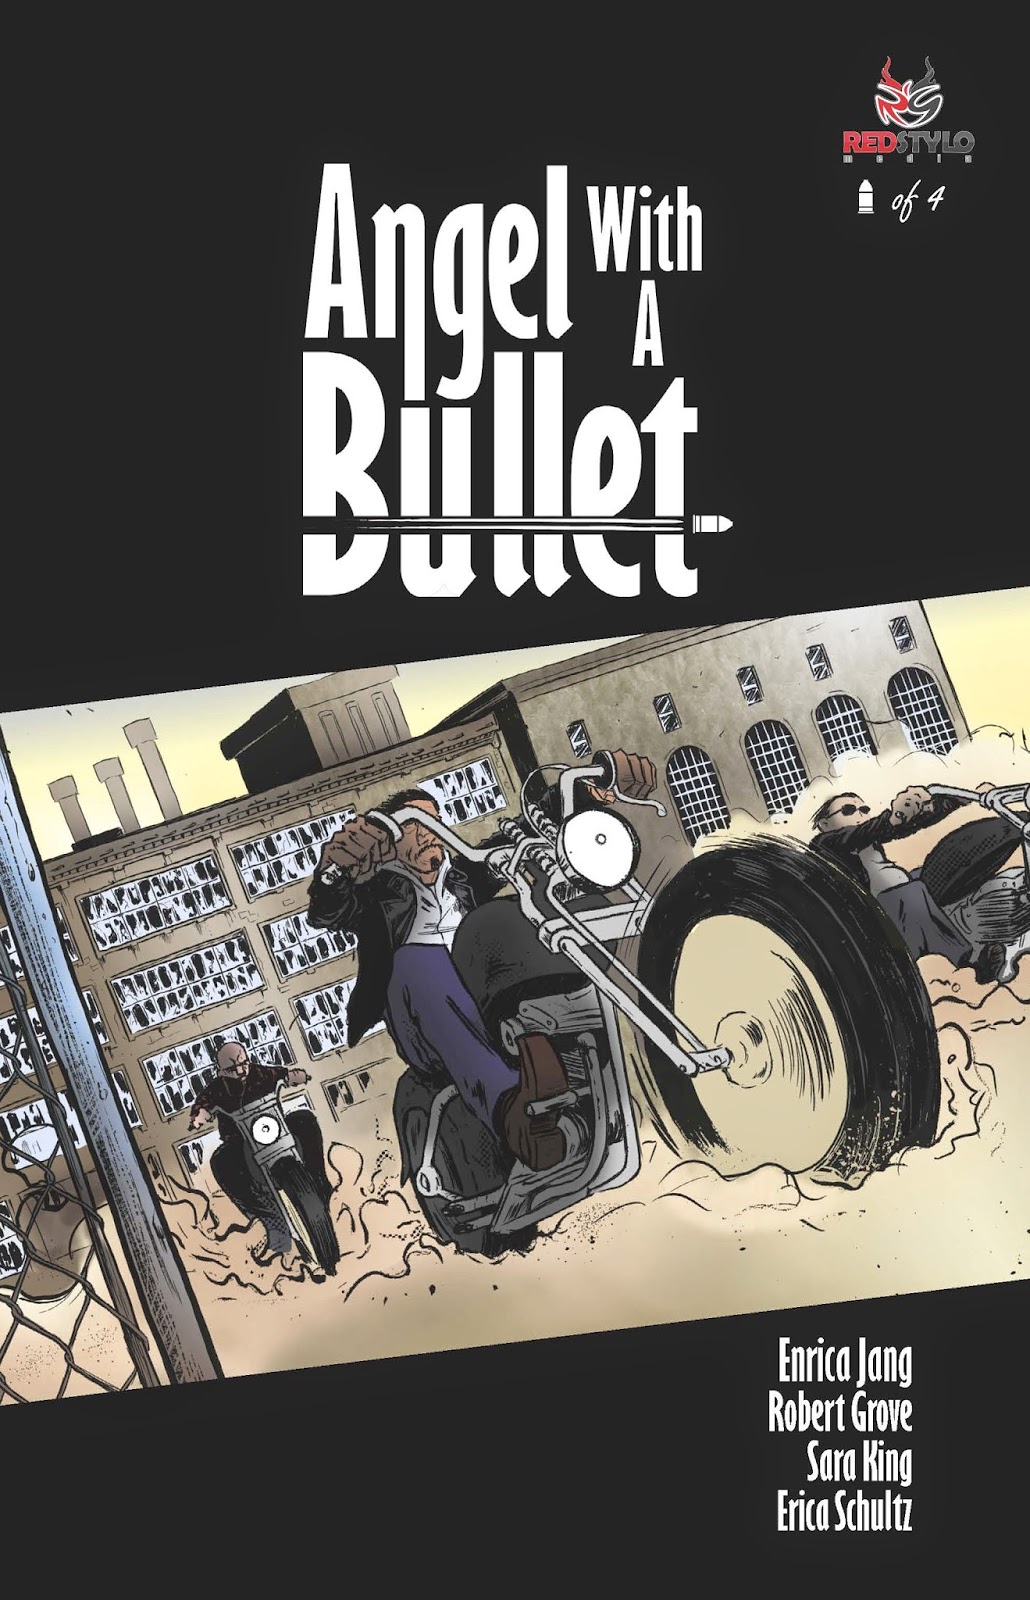 http://redstylo.bigcartel.com/product/angel-with-a-bullet-1-of-4-digital